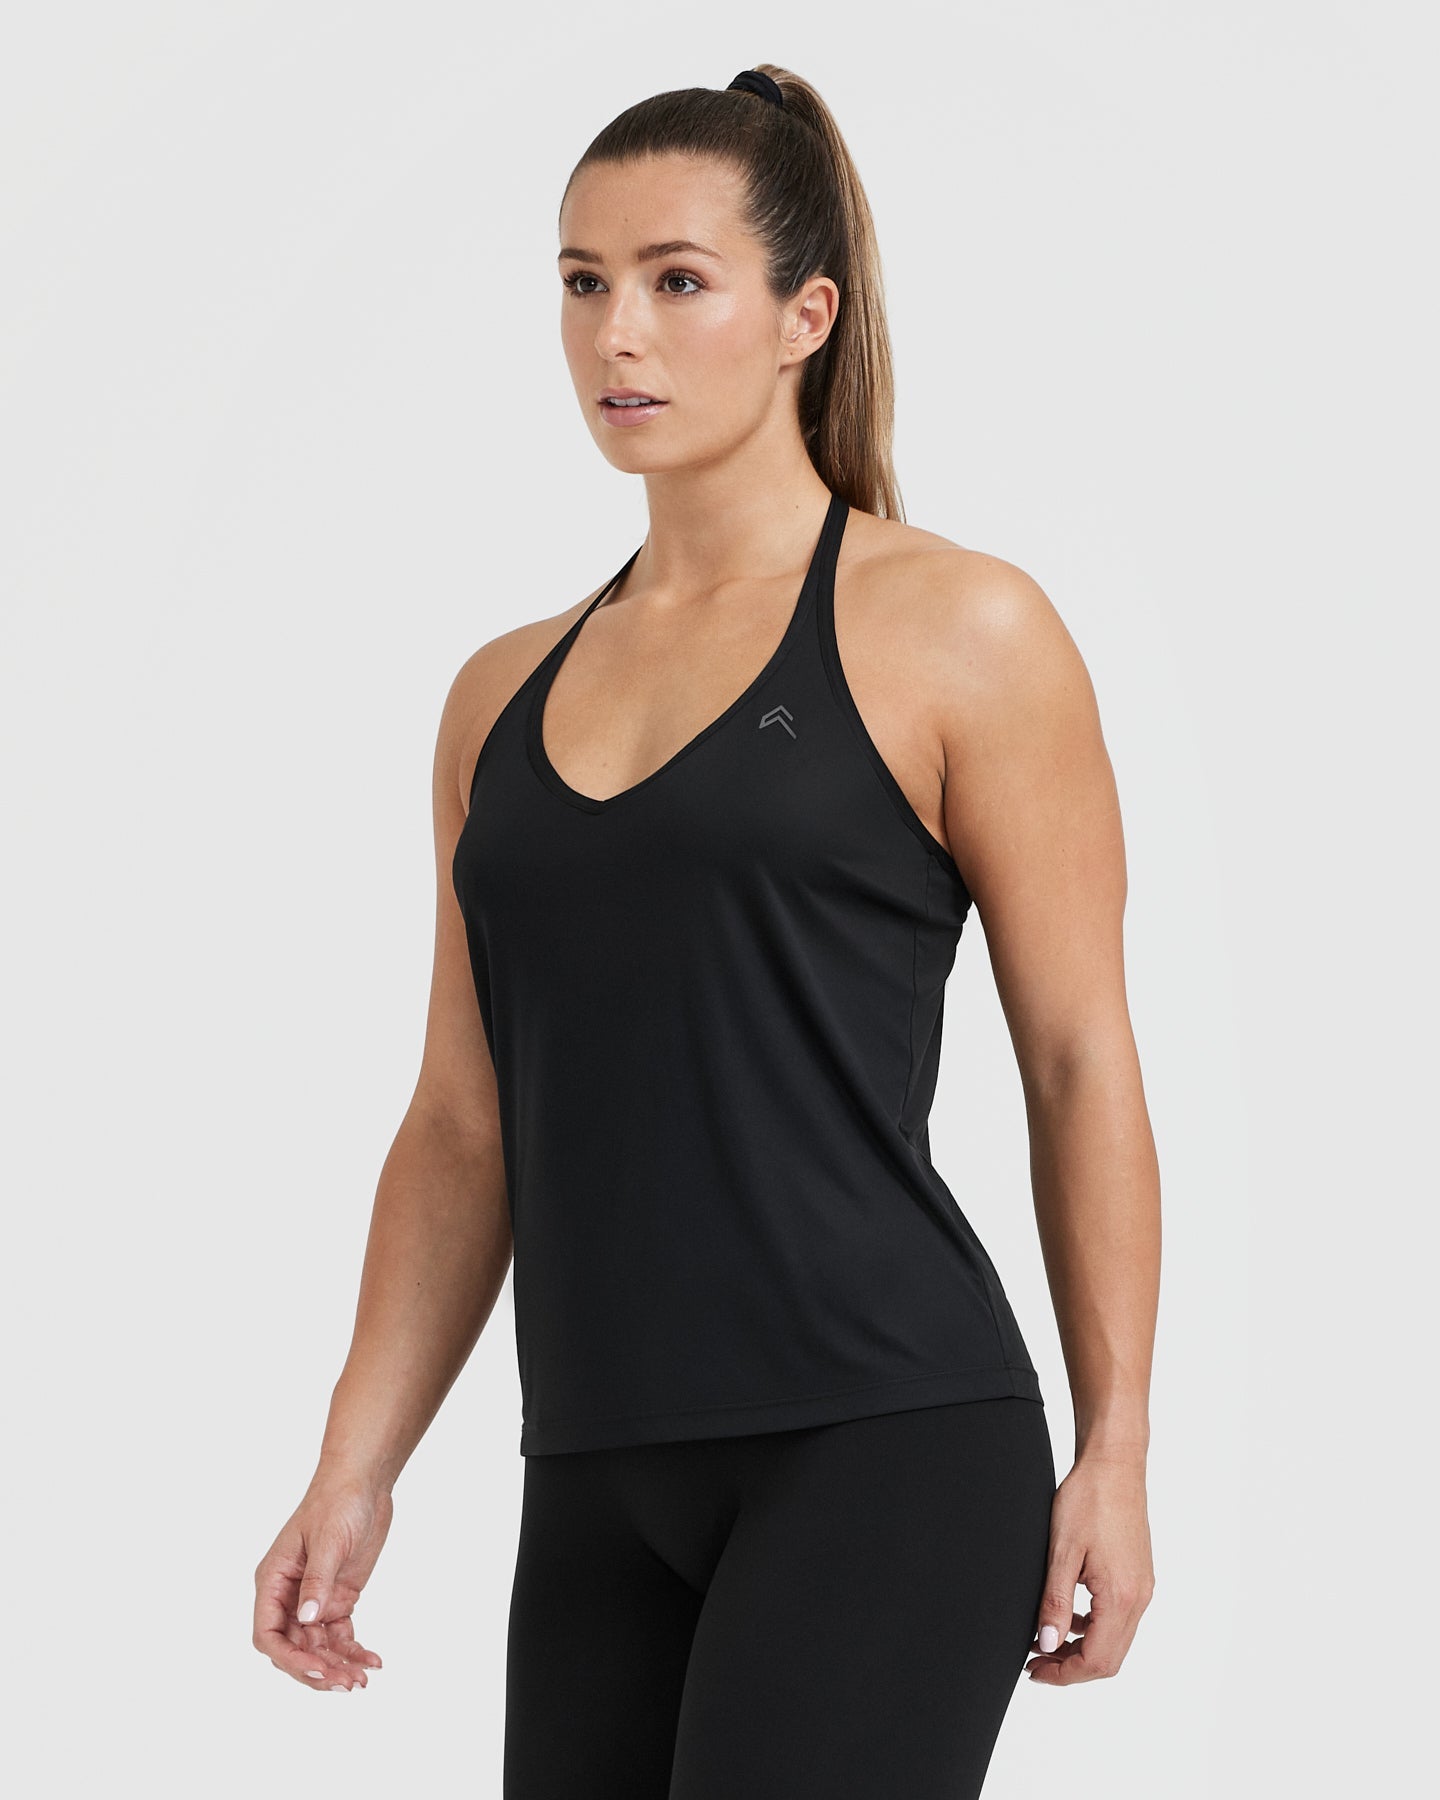 Women's Workout Top Black - Loose Fit